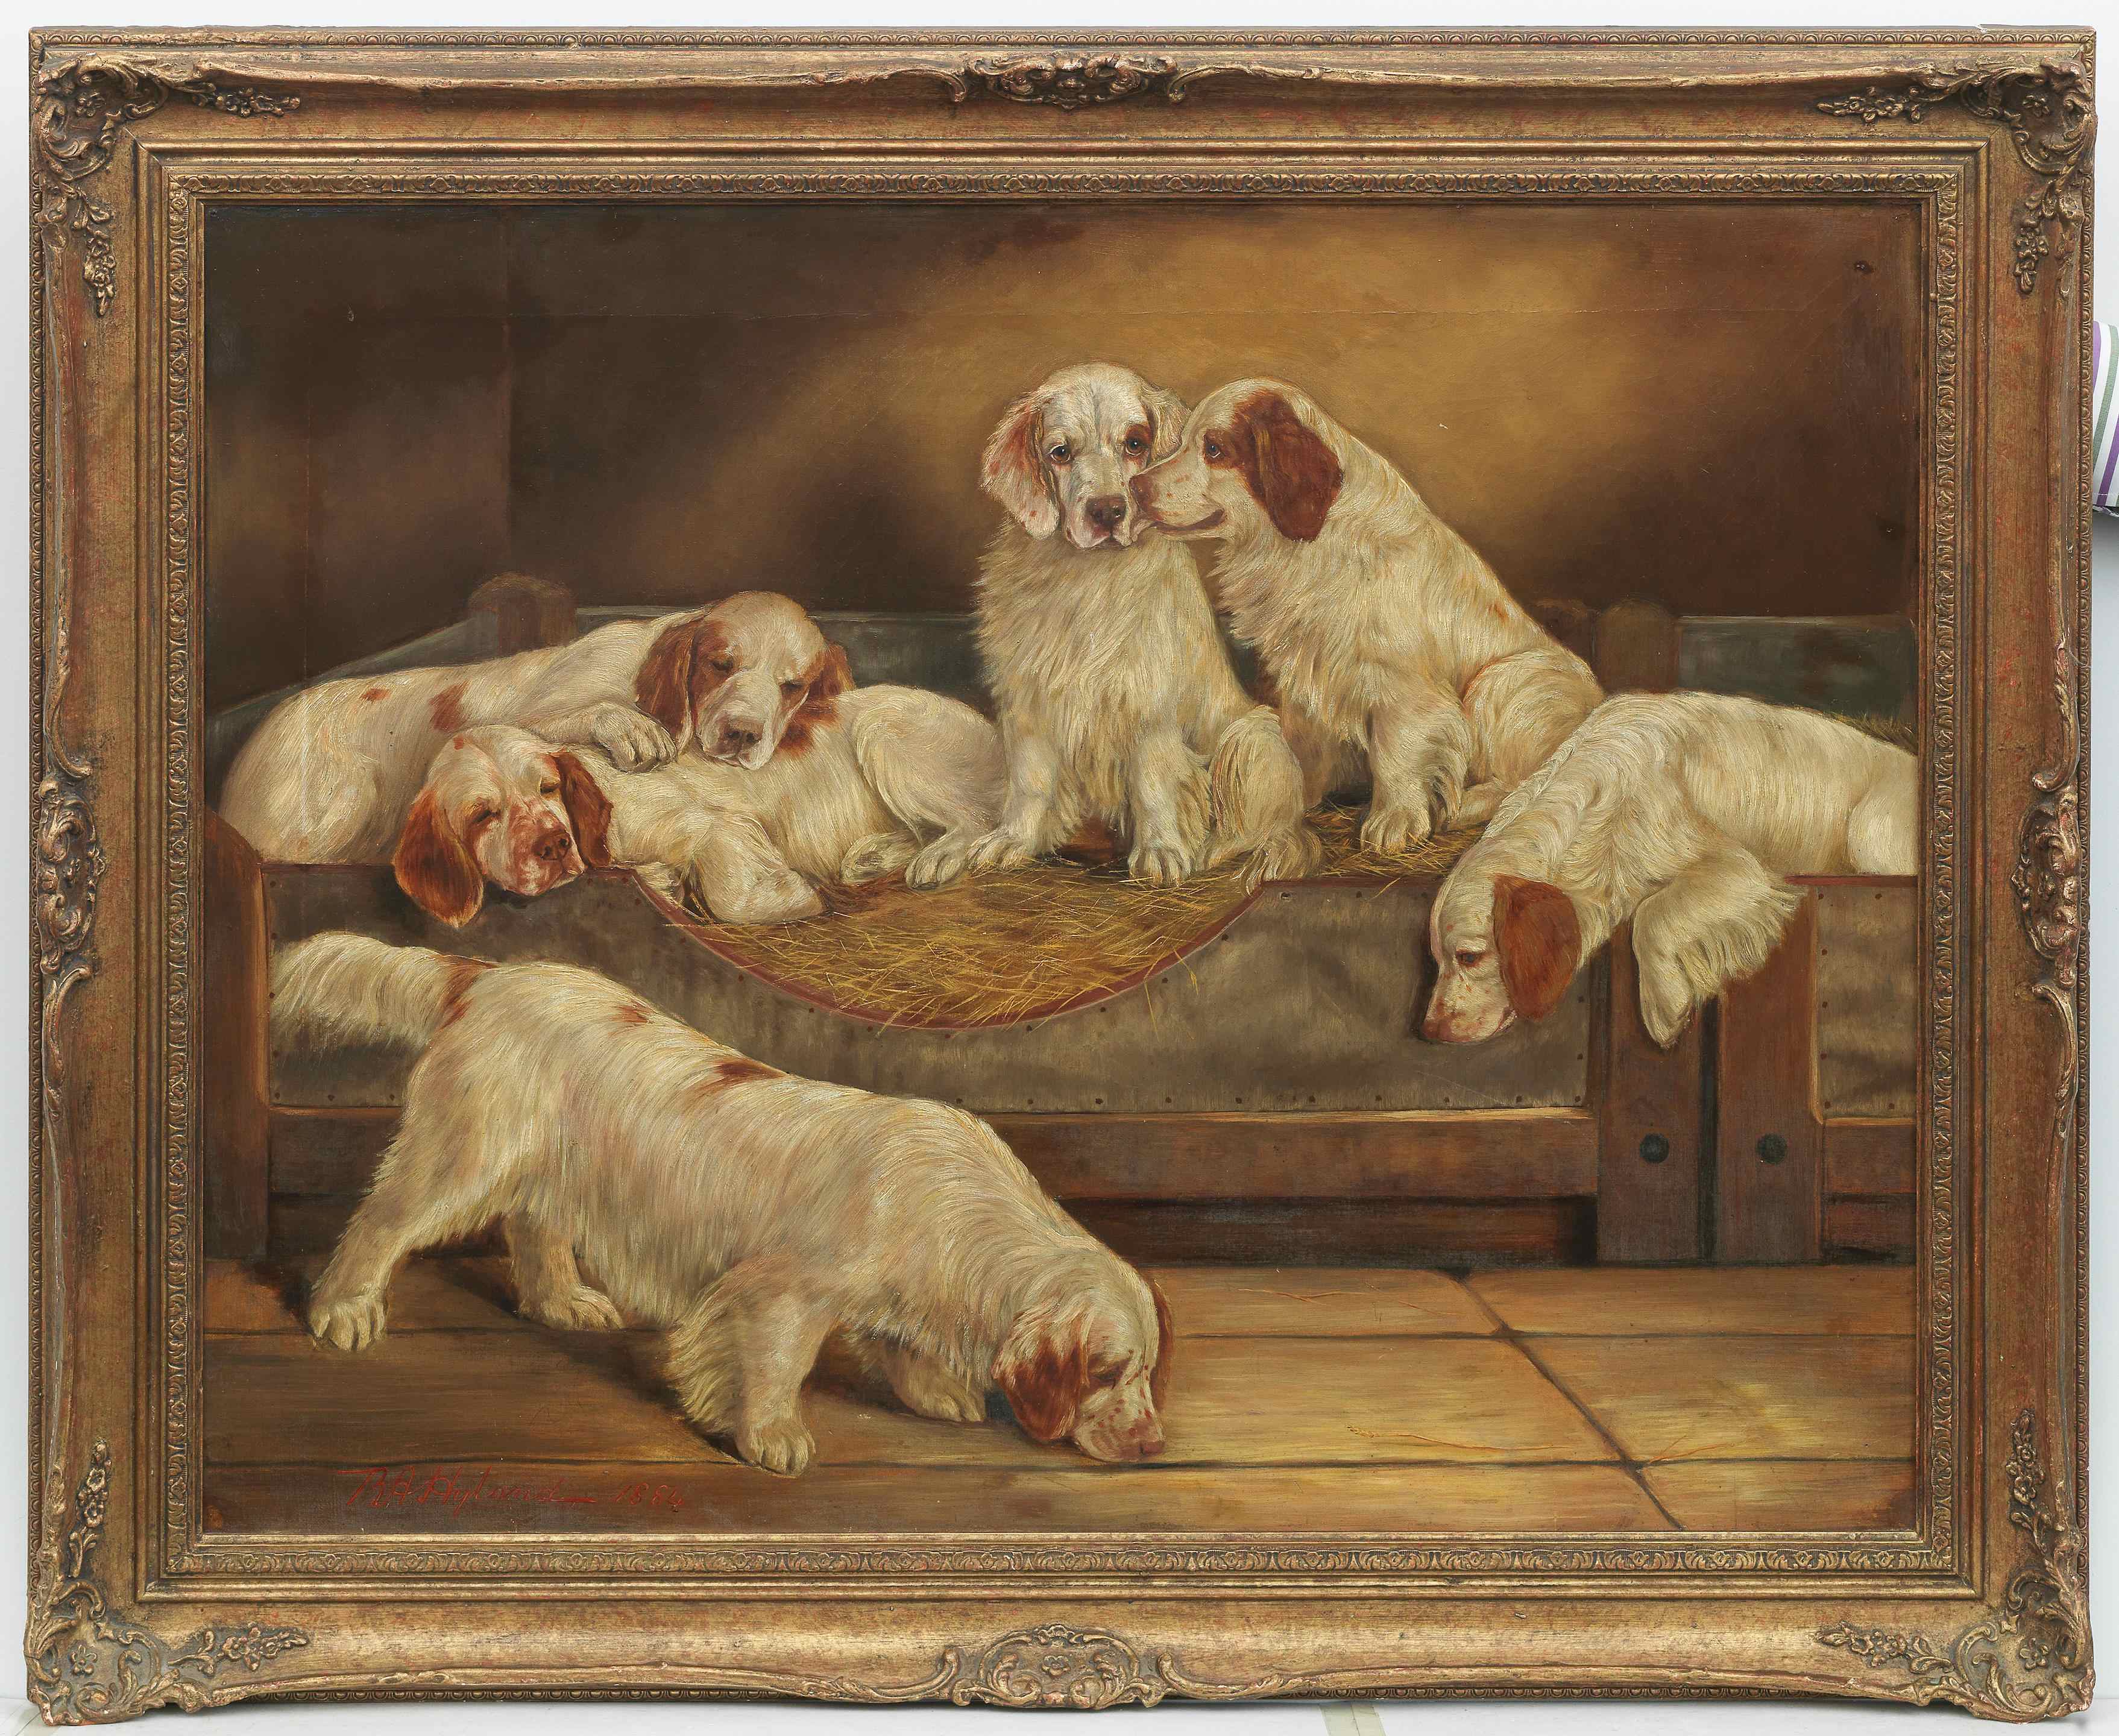 Click for larger image: The Duke of Portland Clumber Spaniels at Welbeck Abbey by Benedict Angell Hyland (English, 1859-1933) - The Duke of Portland Clumber Spaniels at Welbeck Abbey by Benedict Angell Hyland (English, 1859-1933)